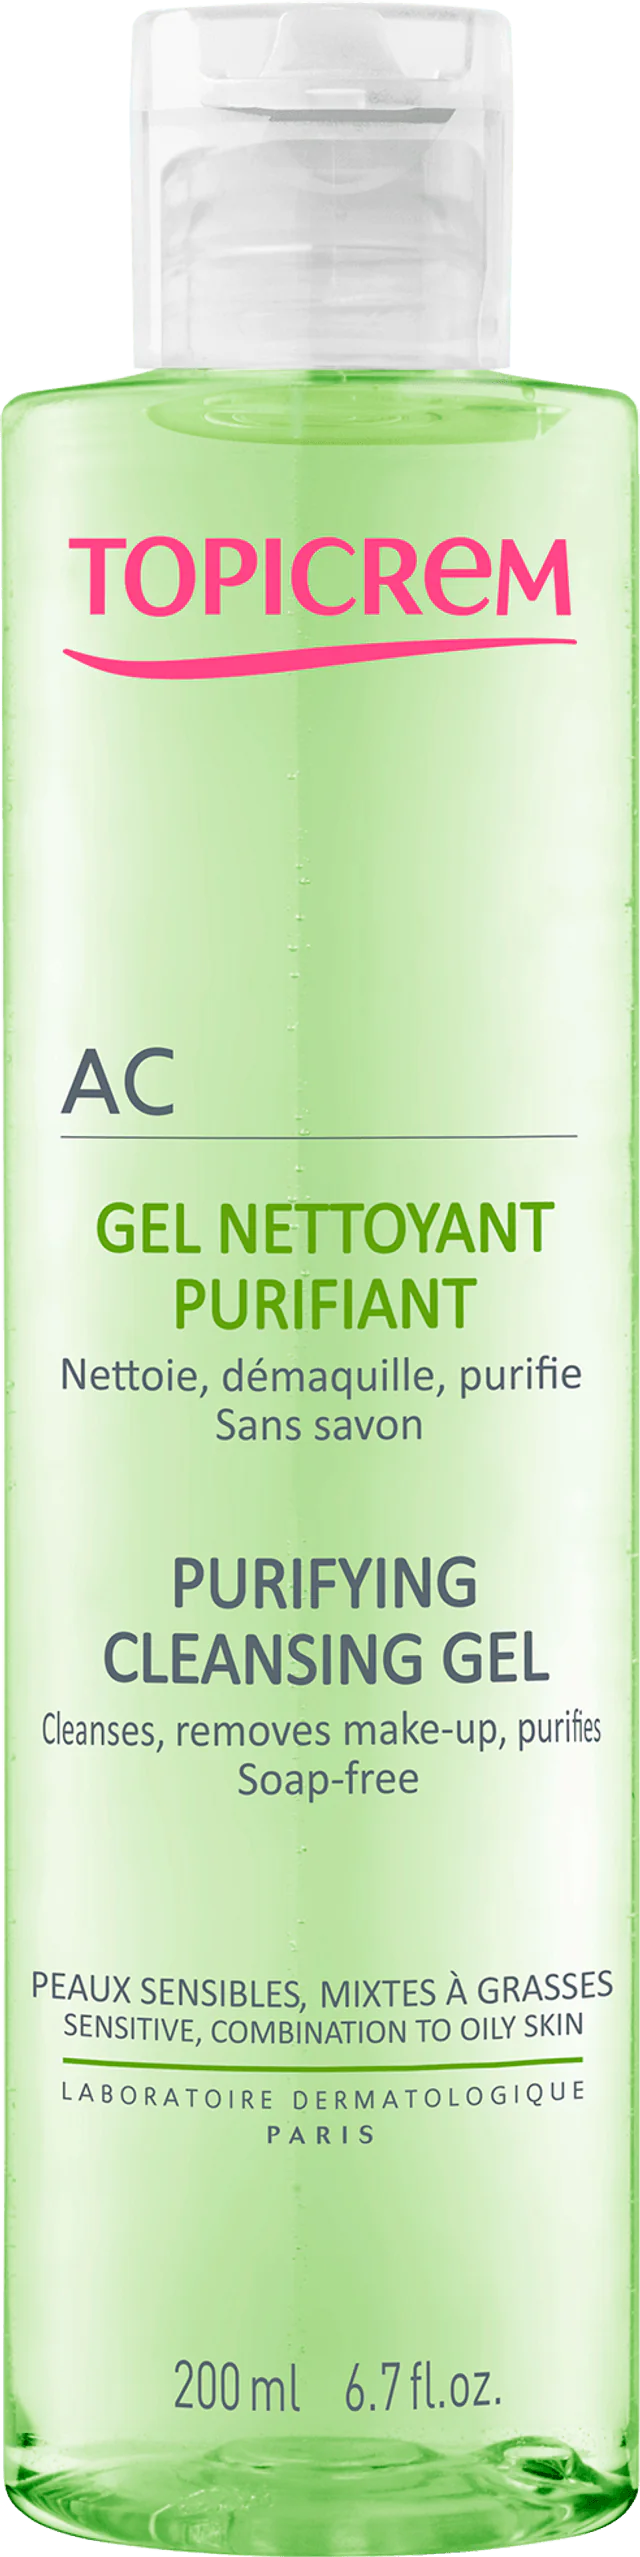 Topicrem Acne Purifying Cleansing Gel